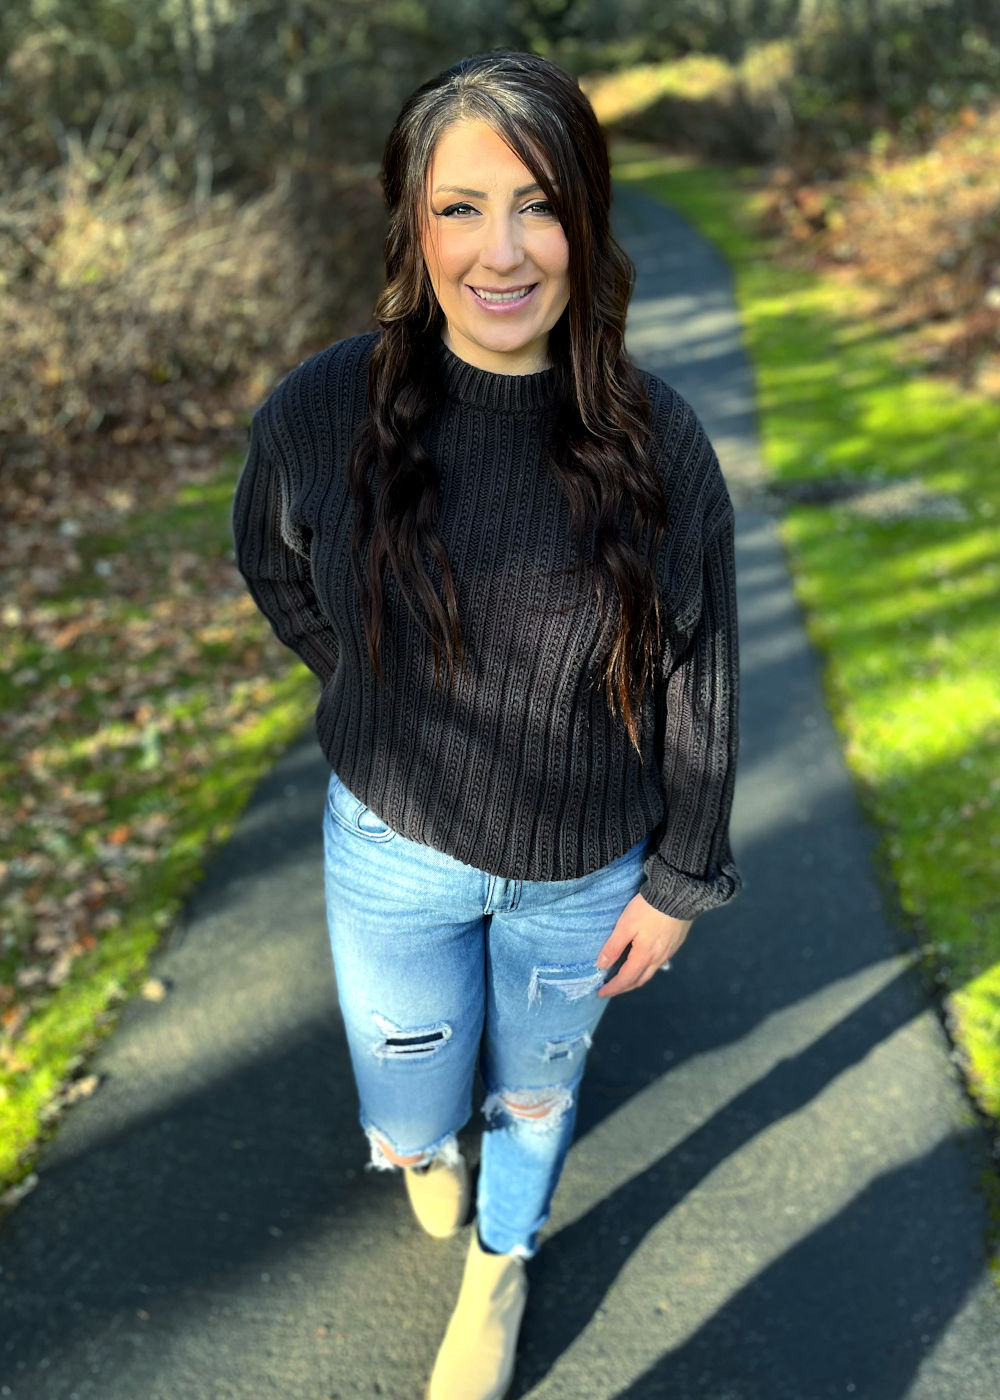 Woman wearing jeans and a sweater stands on a park path.